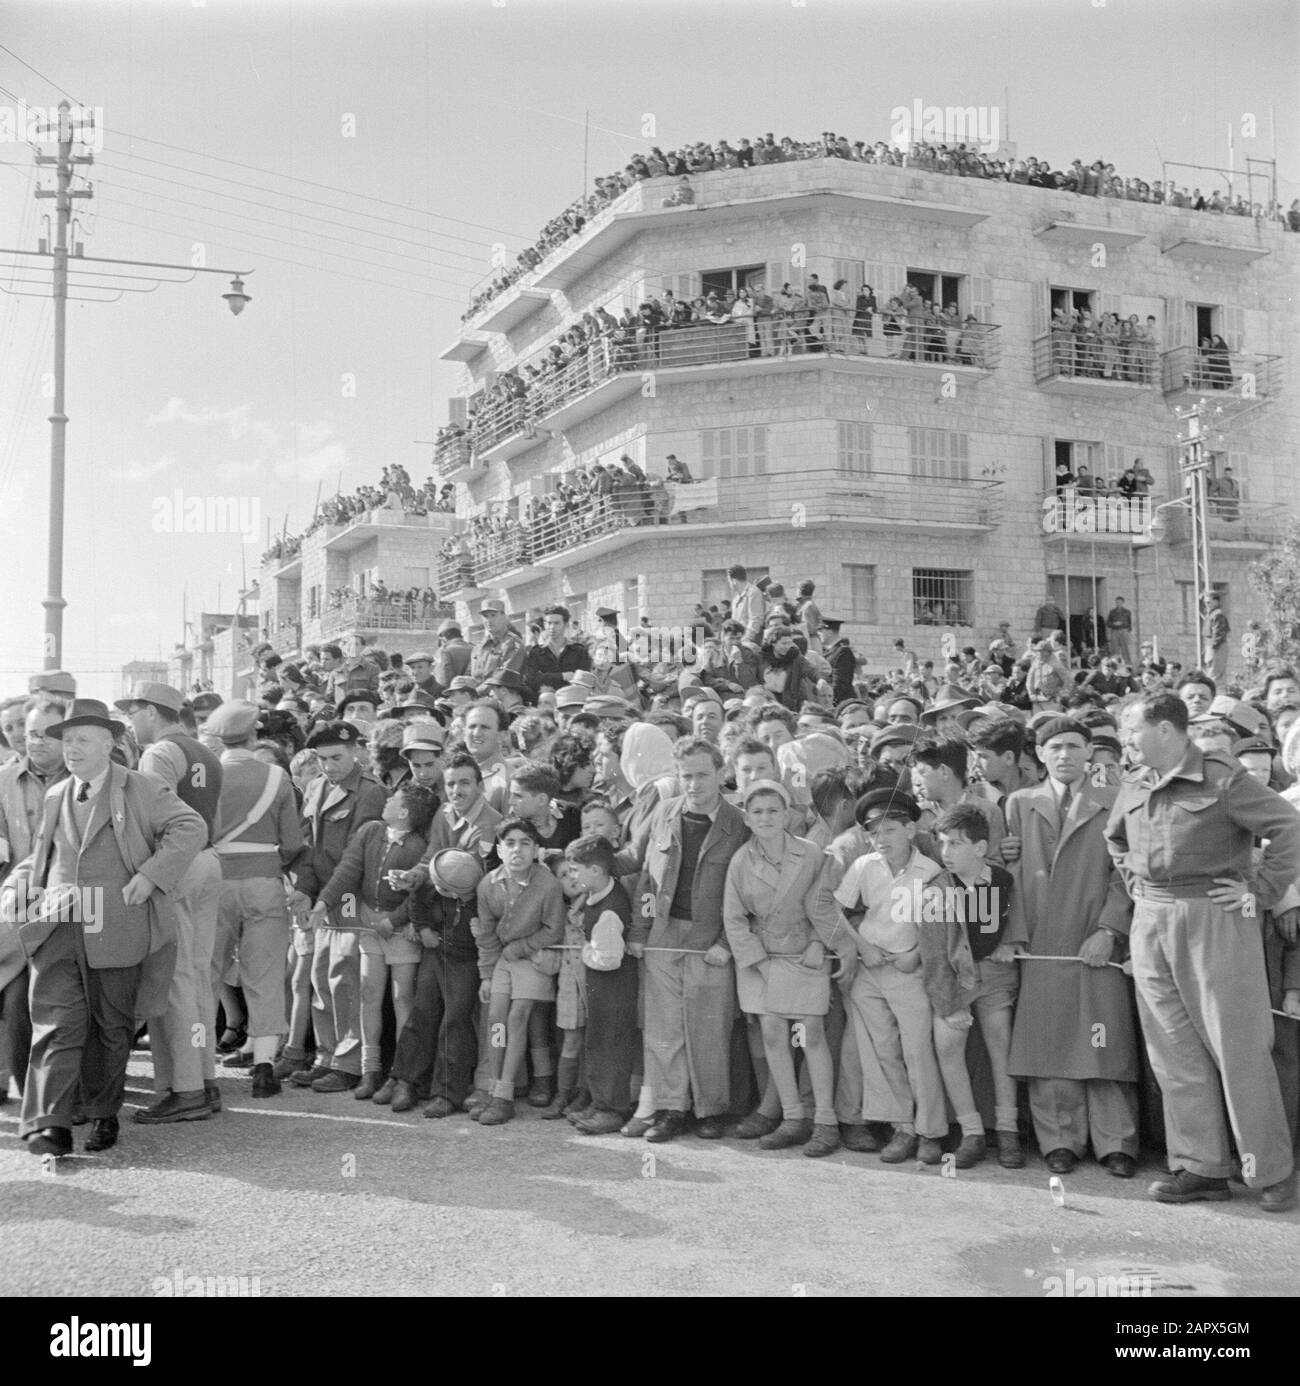 Israel 1948-1949: Haifa  Audience and a police officer during the military parade in Haifa on the occasion of the first anniversary of Israel's independence on May 15, 1949 Date: May 15, 1949 Location: Haifa, Israel Keywords: architecture, military parades, national holidays, police officers, public, uniforms Stock Photo